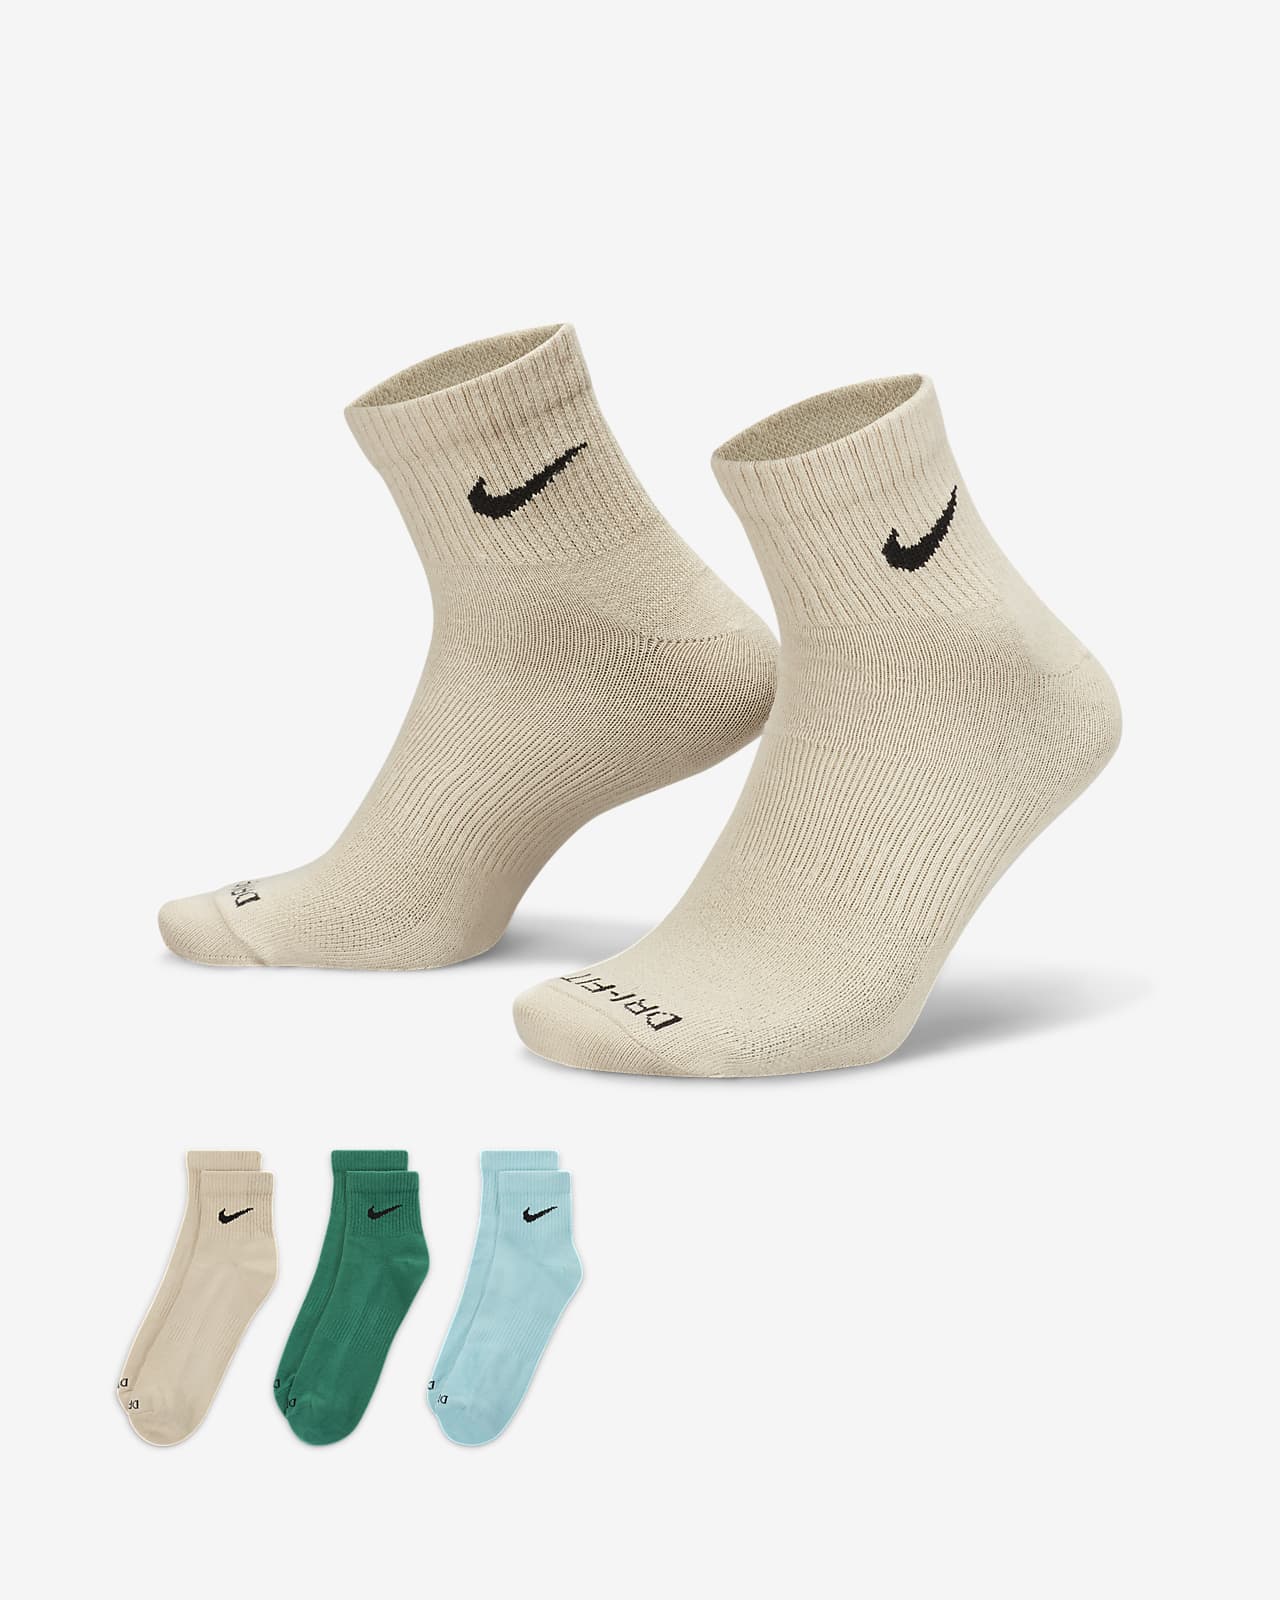 Chaussettes de training Nike Everyday Plus Lightweight (3 paires)